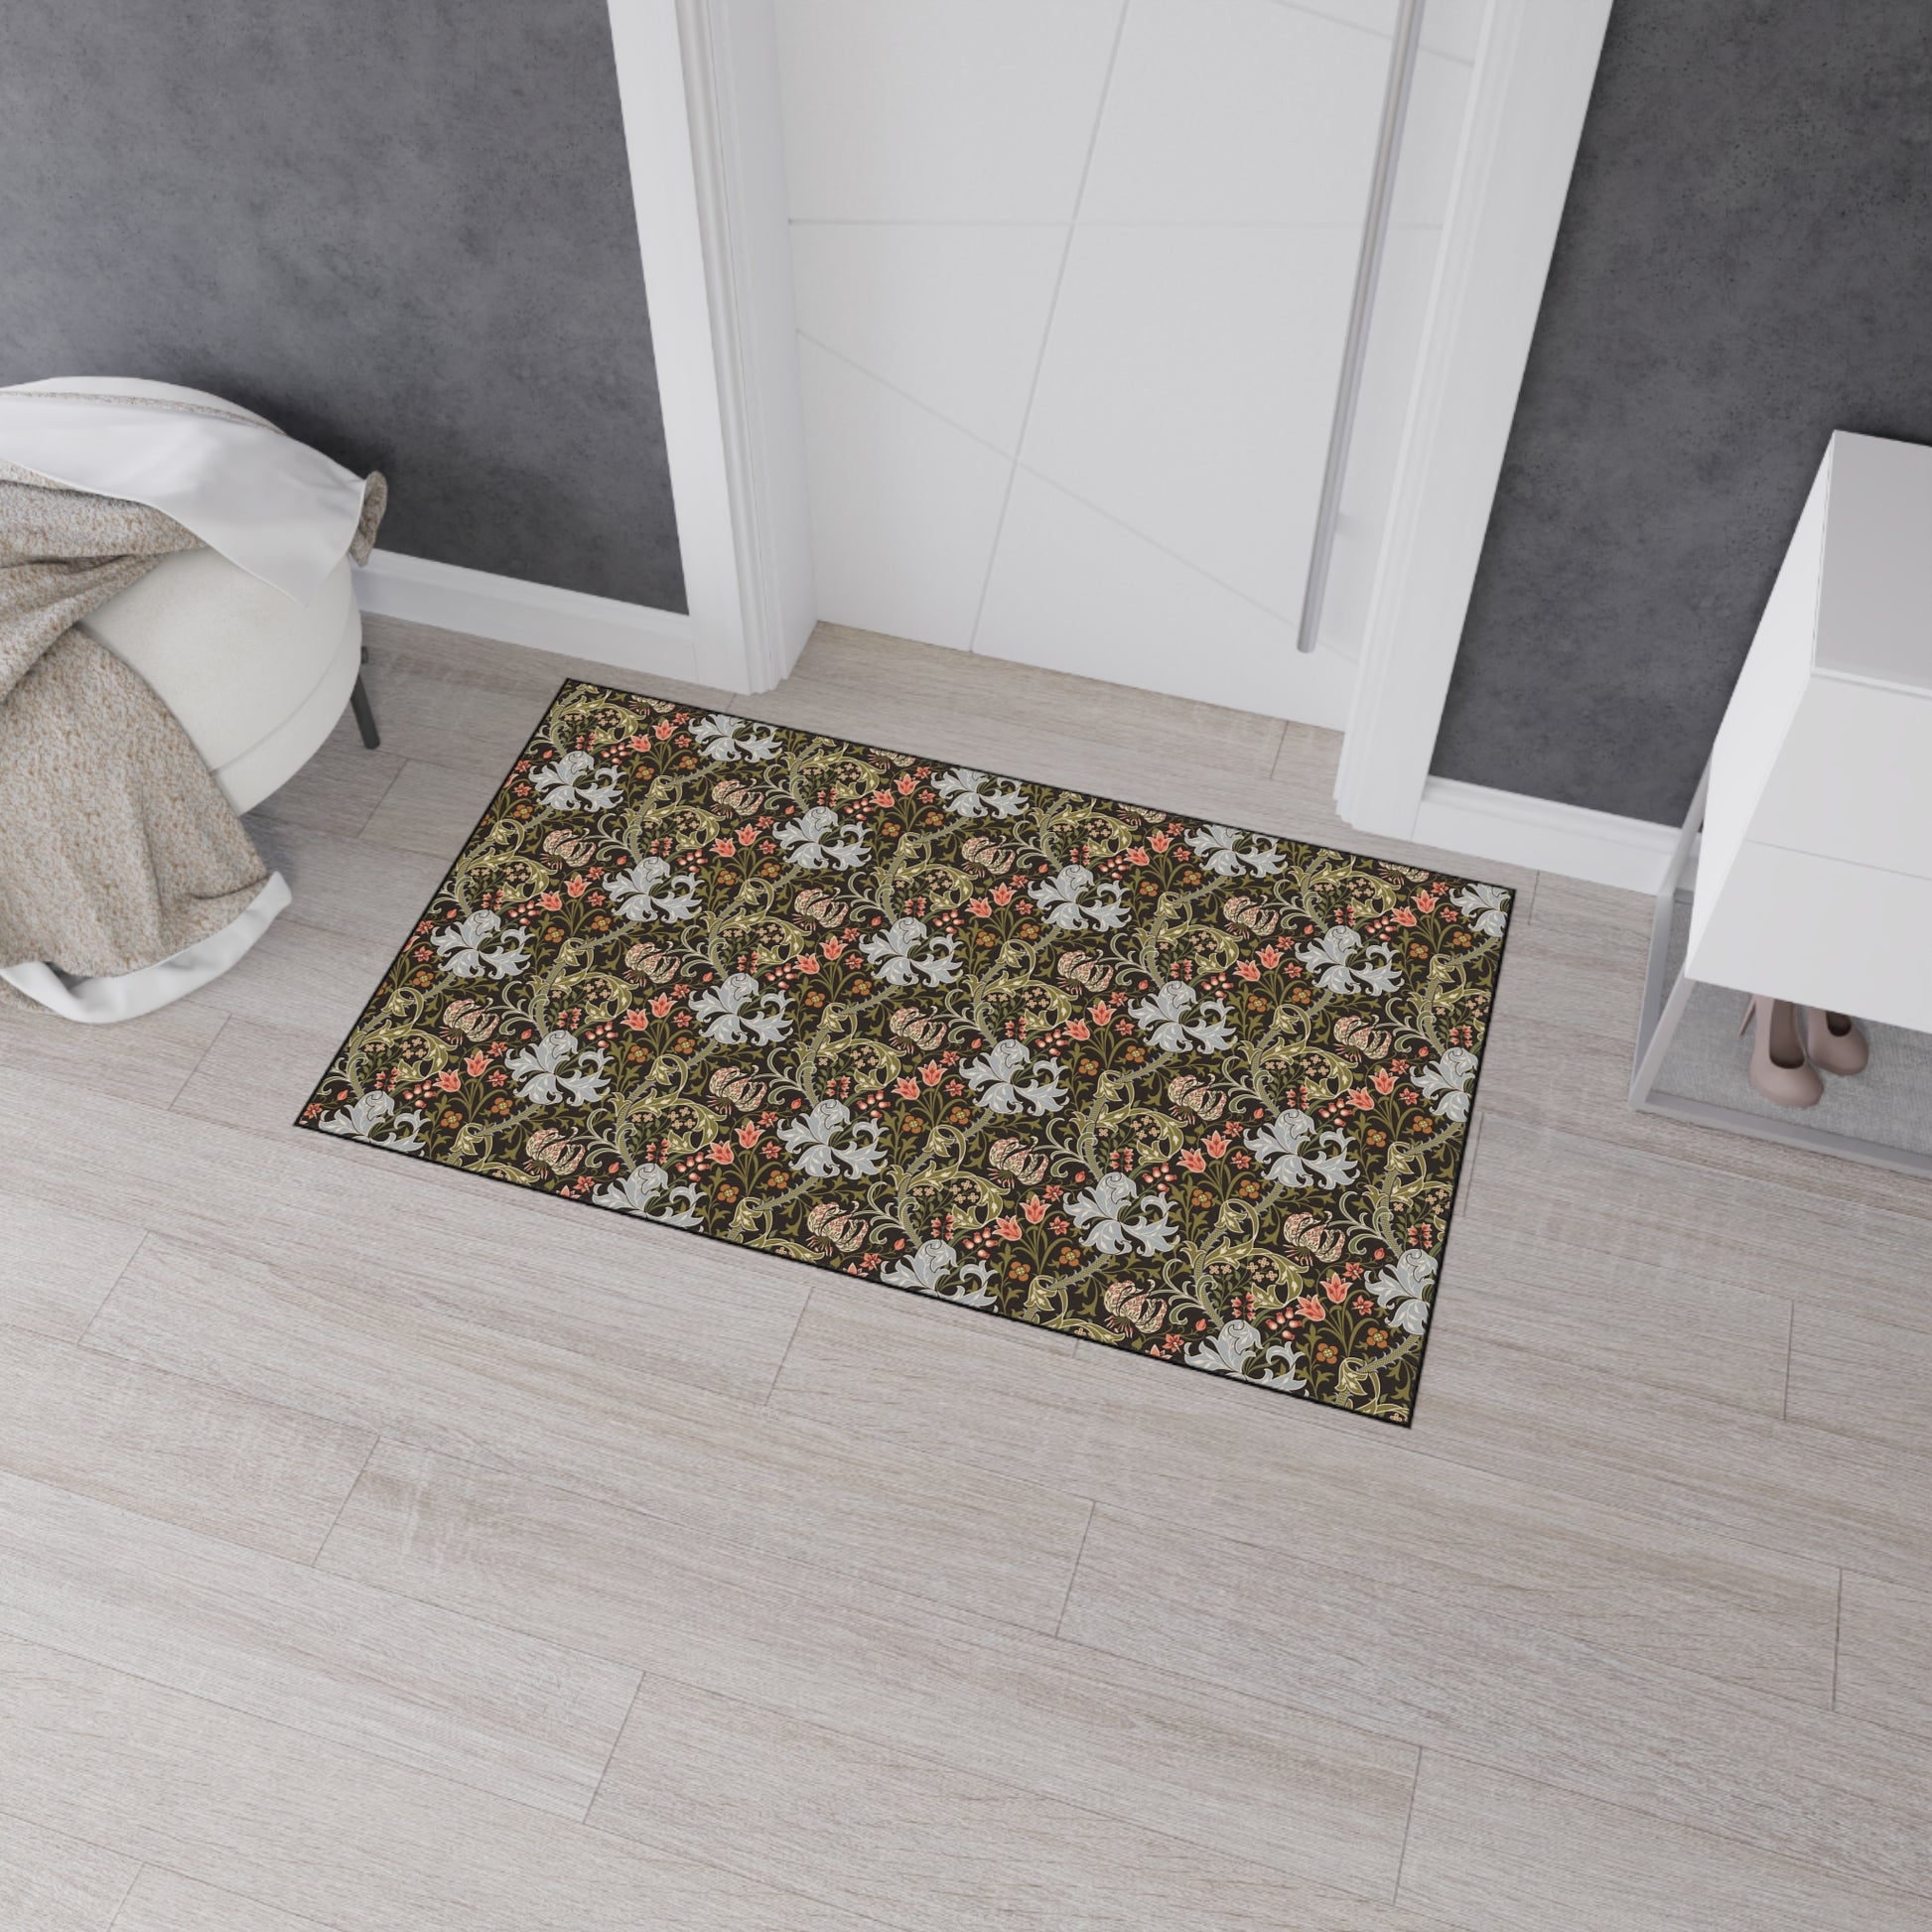 william-morris-co-heavy-duty-floor-mat-golden-lily-collection-midnight-17